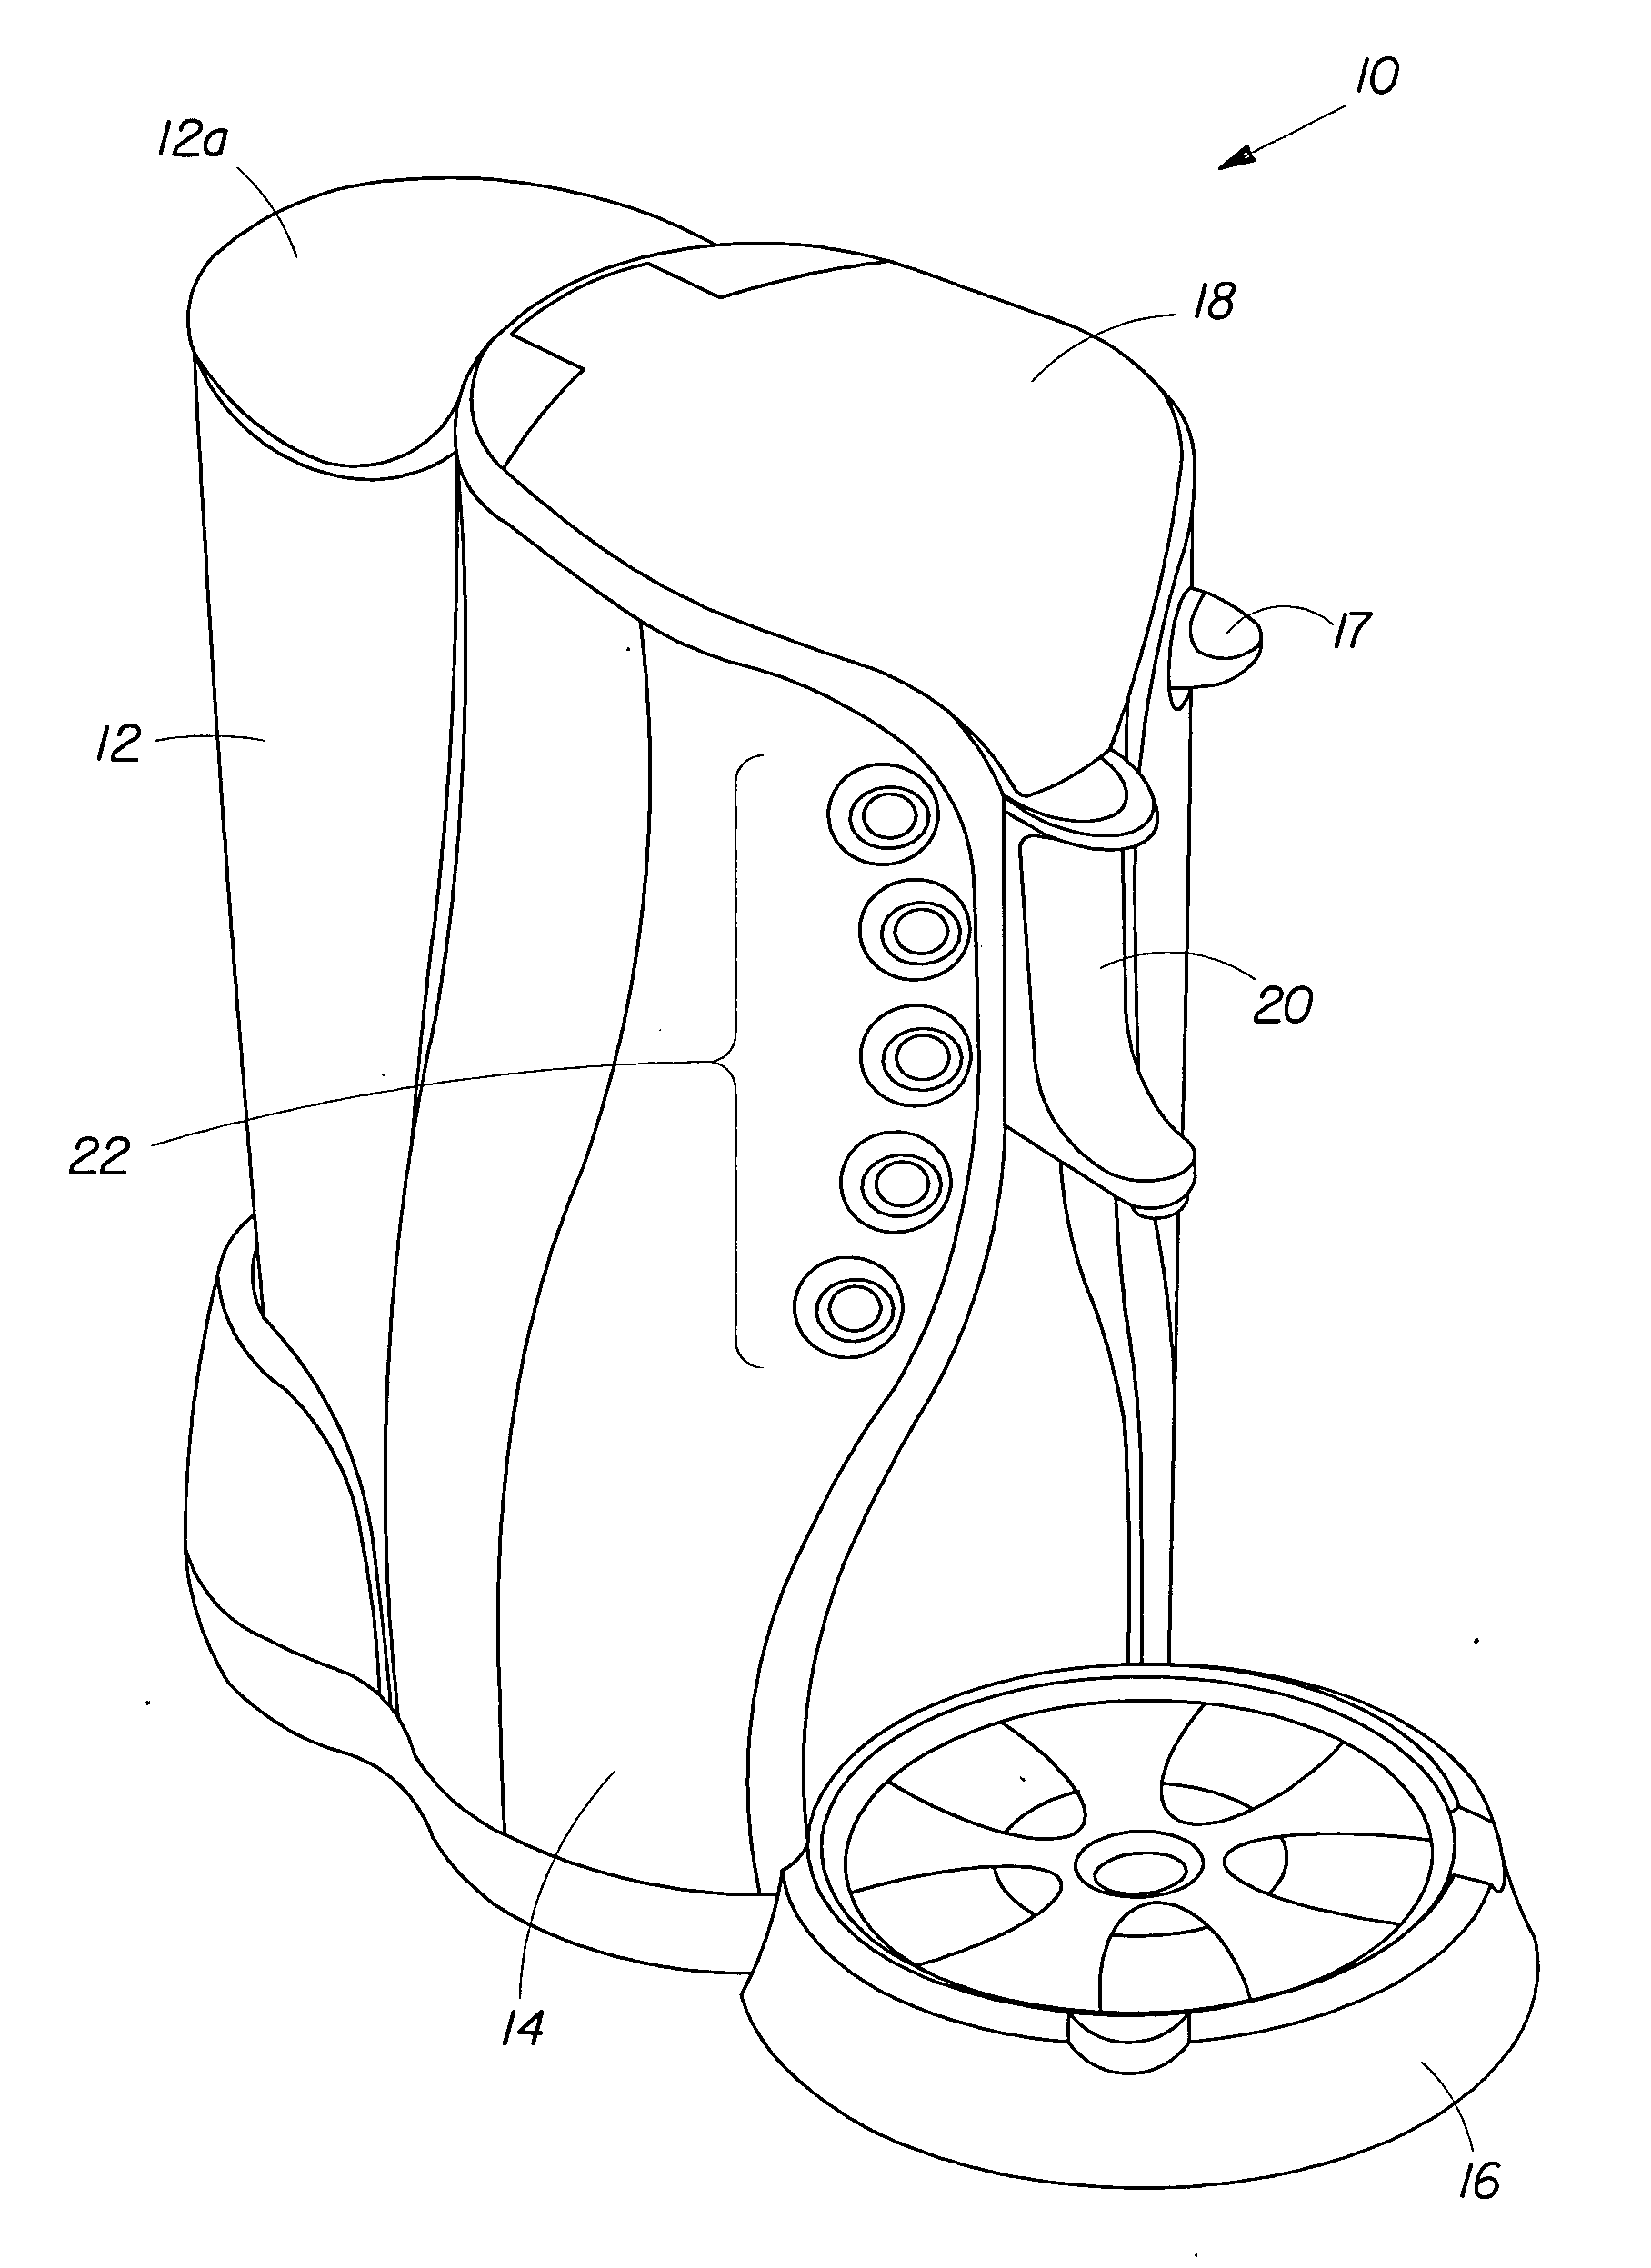 Method and device for brewing beverages